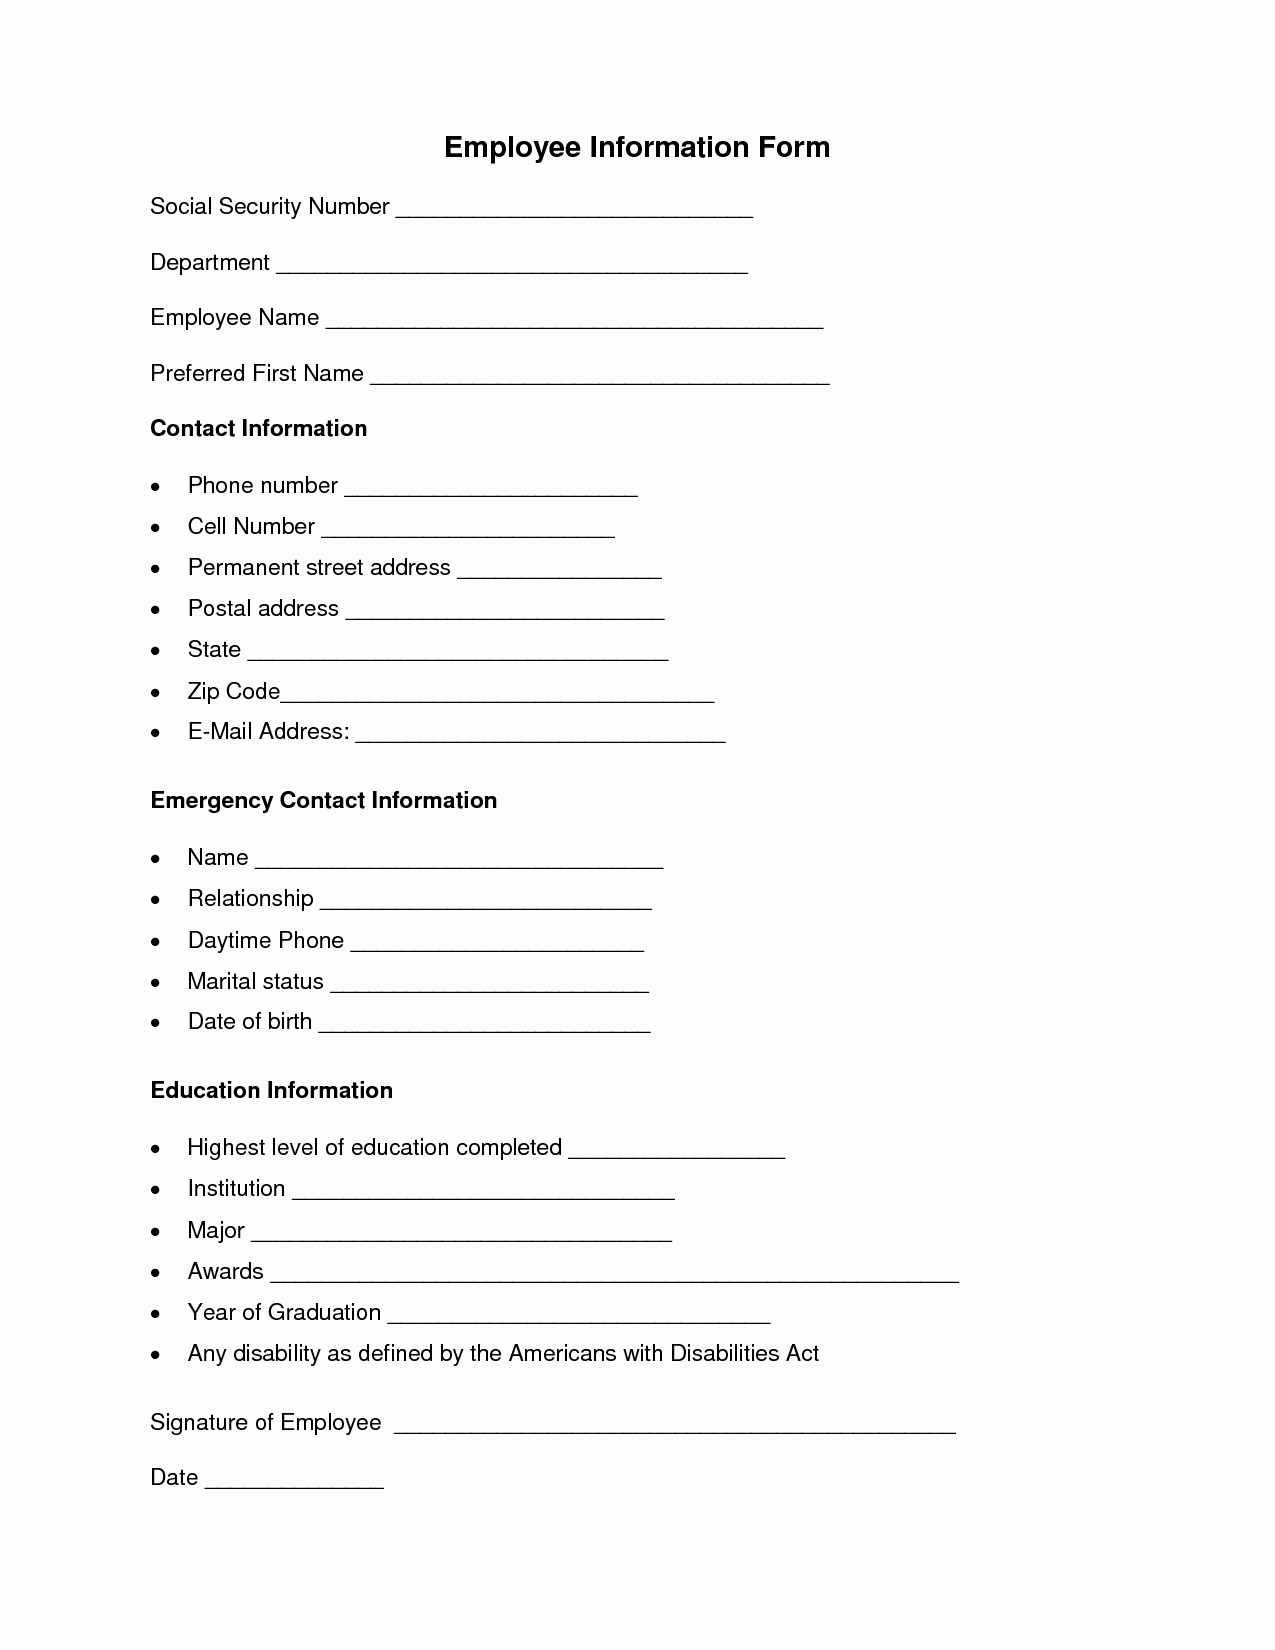 Employee Contact form Template Best Of Employee Information form … forms